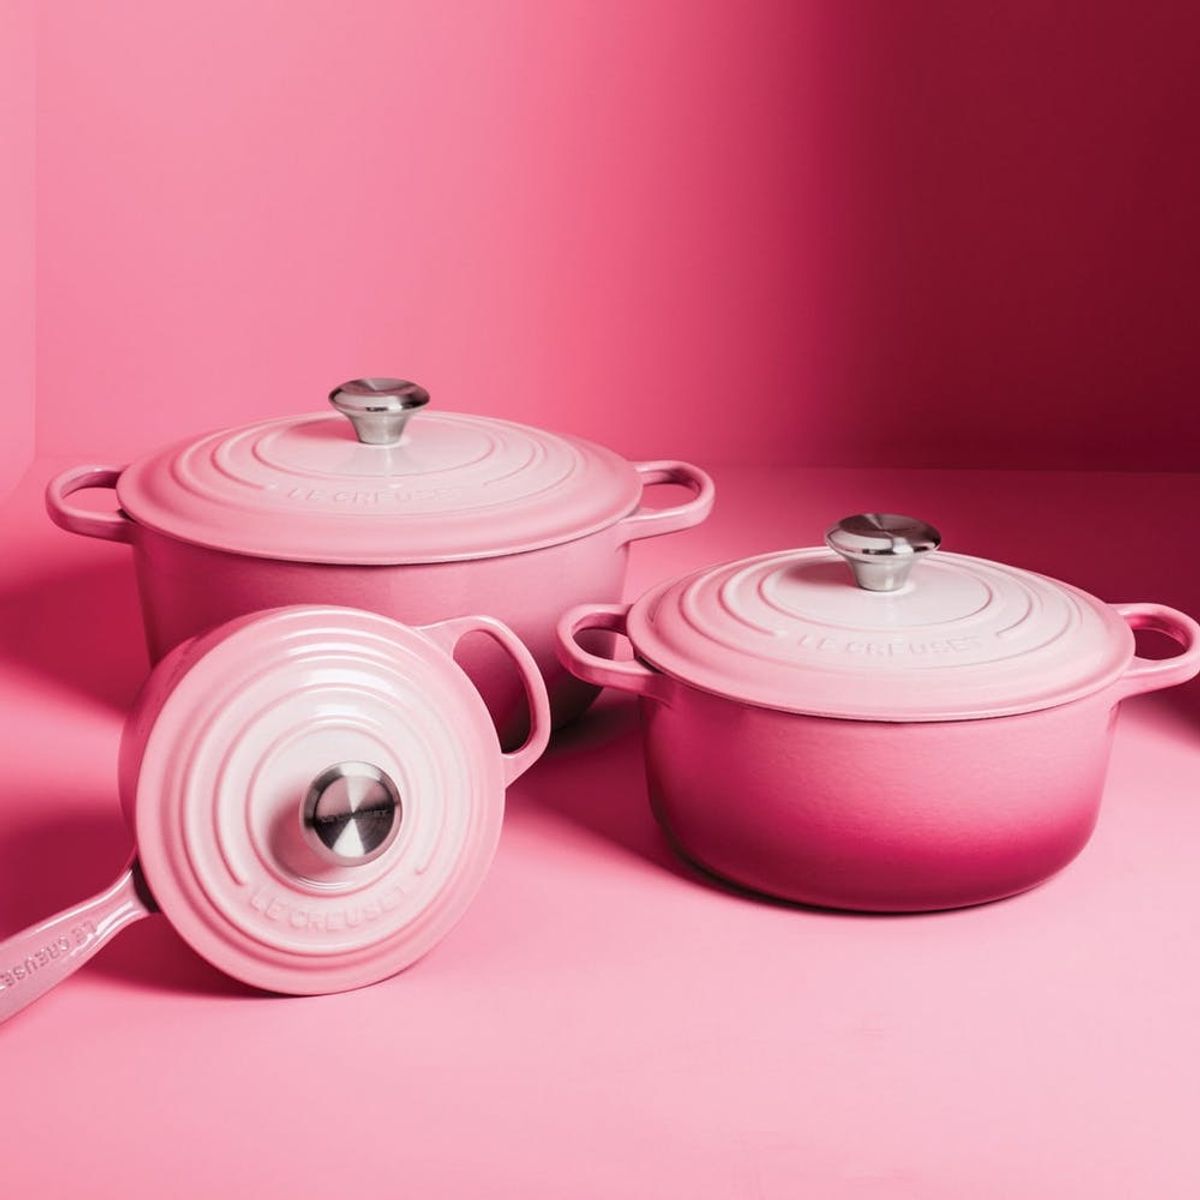 Le Creuset’s New Cookware Will Give Your Kitchen an Instant Facelift